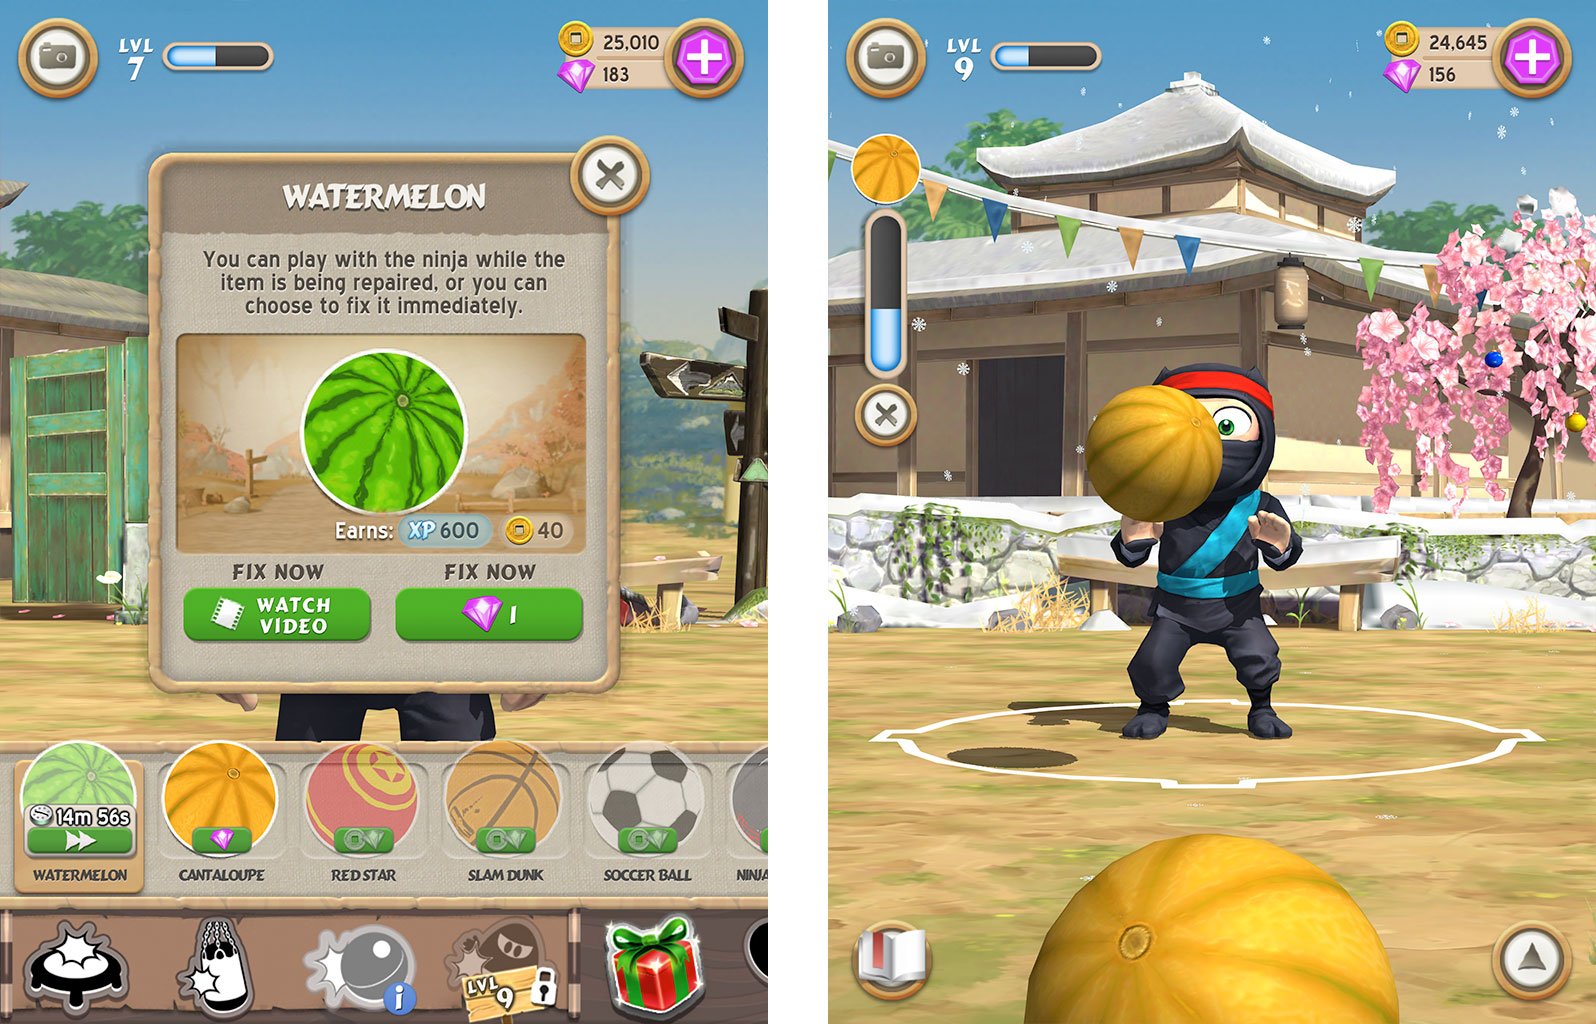 Clumsy Ninja Top 10 tips, tricks, and cheats: Complete training